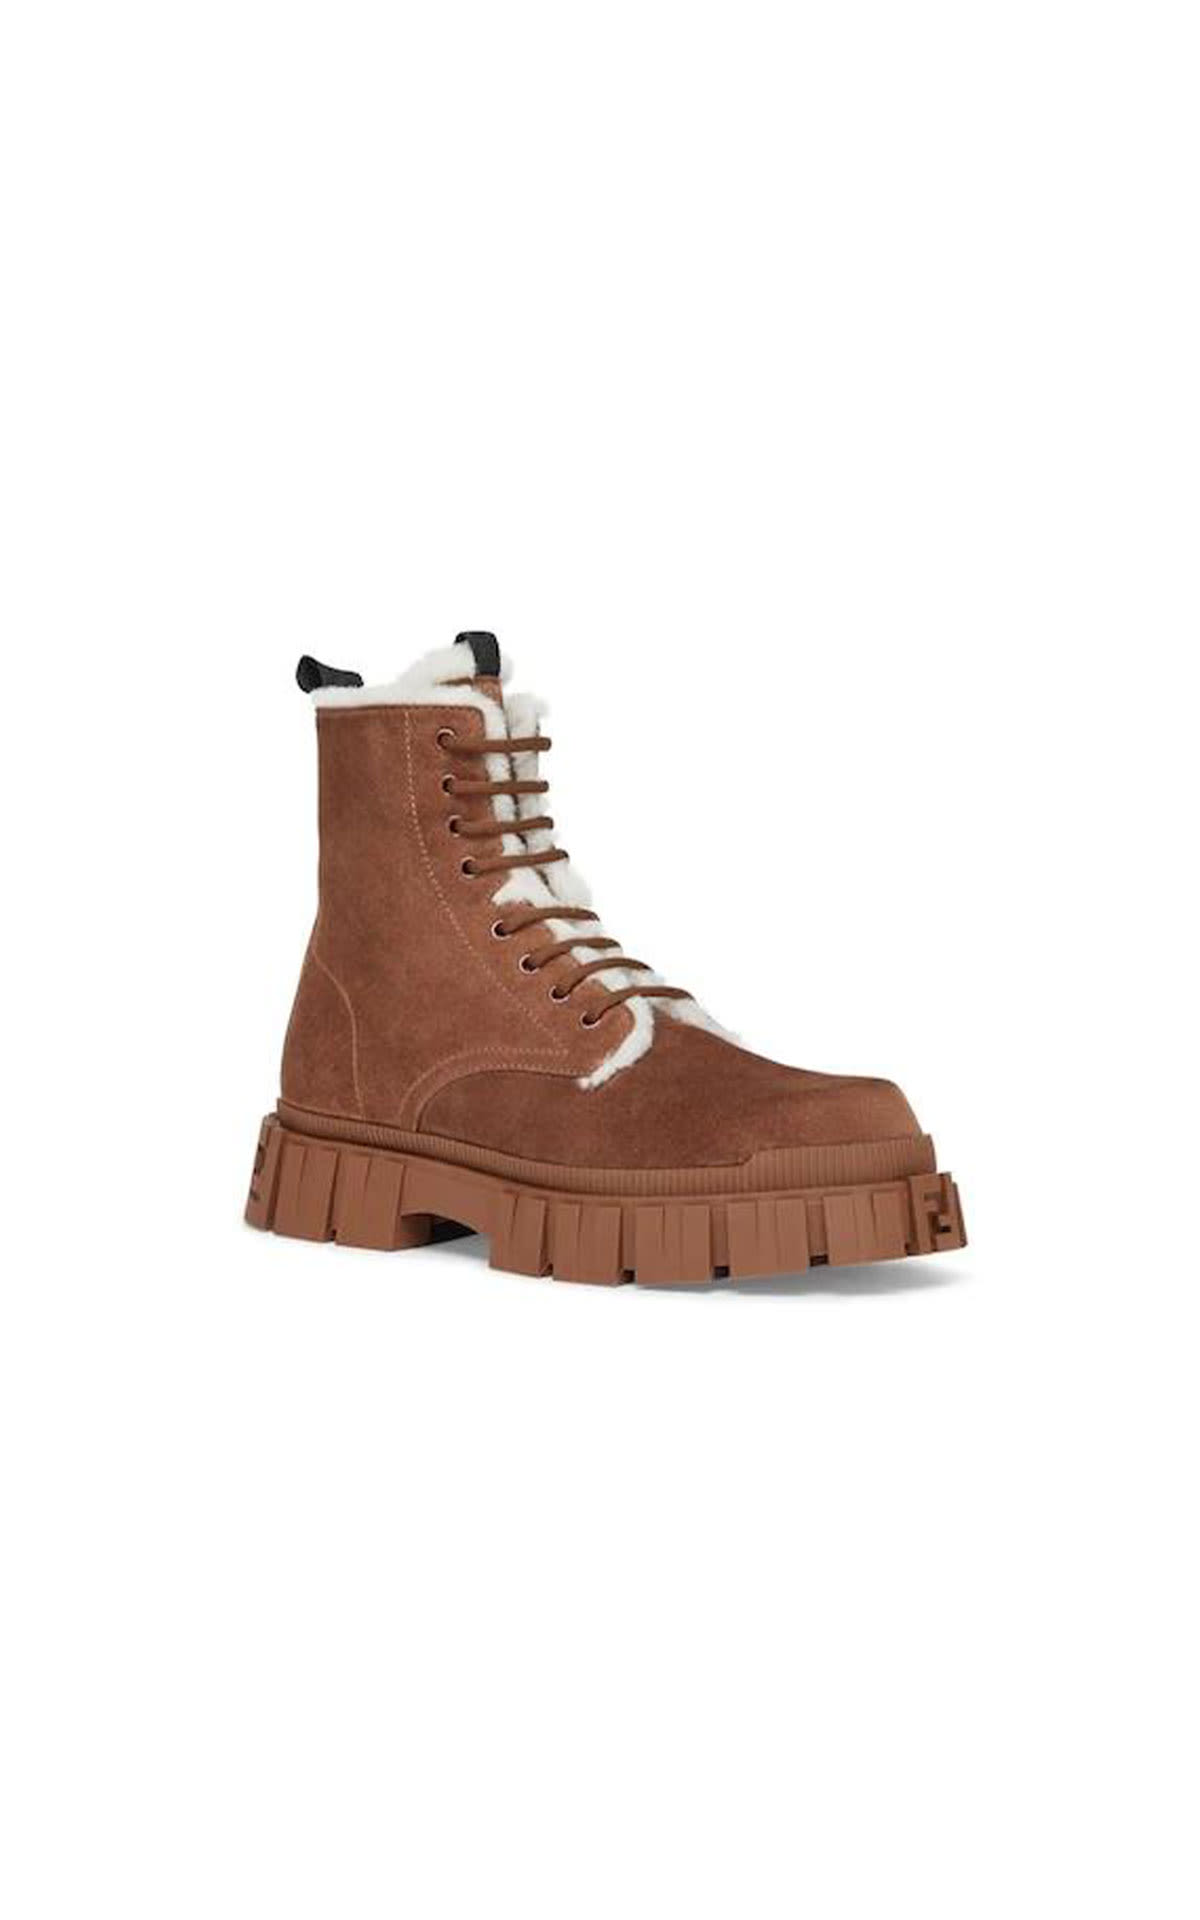 Fendi Force boot from Bicester Village